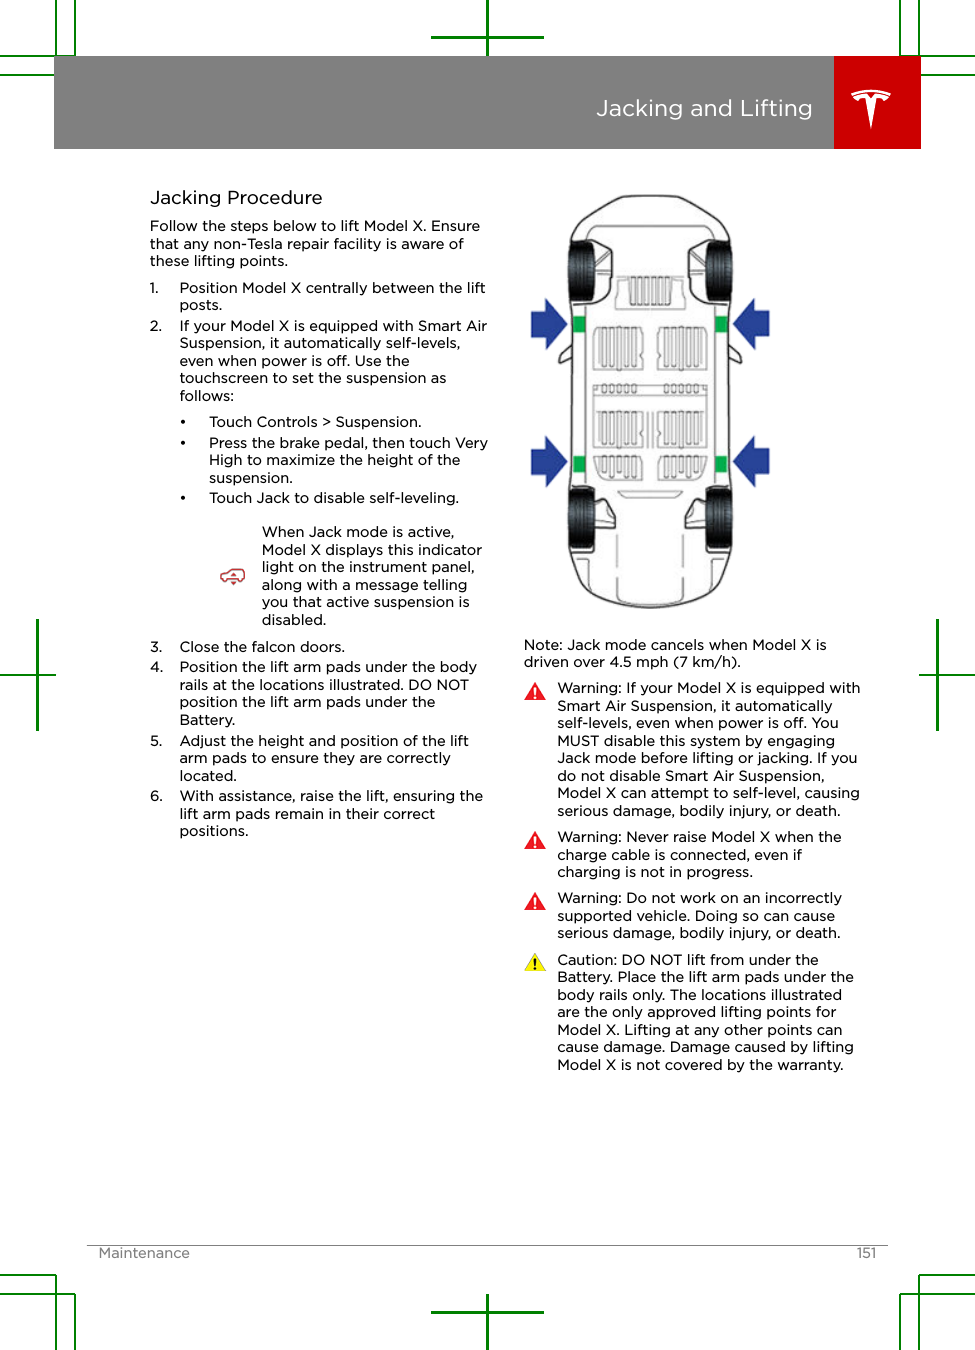 Jacking ProcedureFollow the steps below to lift Model X. Ensurethat any non-Tesla repair facility is aware ofthese lifting points.1. Position Model X centrally between the liftposts.2. If your Model X is equipped with Smart AirSuspension, it automatically self-levels,even when power is o. Use thetouchscreen to set the suspension asfollows:• Touch Controls &gt; Suspension.• Press the brake pedal, then touch VeryHigh to maximize the height of thesuspension.• Touch Jack to disable self-leveling.When Jack mode is active,Model X displays this indicatorlight on the instrument panel,along with a message tellingyou that active suspension isdisabled.3. Close the falcon doors.4. Position the lift arm pads under the bodyrails at the locations illustrated. DO NOTposition the lift arm pads under theBattery.5. Adjust the height and position of the liftarm pads to ensure they are correctlylocated.6. With assistance, raise the lift, ensuring thelift arm pads remain in their correctpositions.Note: Jack mode cancels when Model X isdriven over 4.5 mph (7 km/h).Warning: If your Model X is equipped withSmart Air Suspension, it automaticallyself-levels, even when power is o. YouMUST disable this system by engagingJack mode before lifting or jacking. If youdo not disable Smart Air Suspension,Model X can attempt to self-level, causingserious damage, bodily injury, or death.Warning: Never raise Model X when thecharge cable is connected, even ifcharging is not in progress.Warning: Do not work on an incorrectlysupported vehicle. Doing so can causeserious damage, bodily injury, or death.Caution: DO NOT lift from under theBattery. Place the lift arm pads under thebody rails only. The locations illustratedare the only approved lifting points forModel X. Lifting at any other points cancause damage. Damage caused by liftingModel X is not covered by the warranty.Jacking and LiftingMaintenance 151